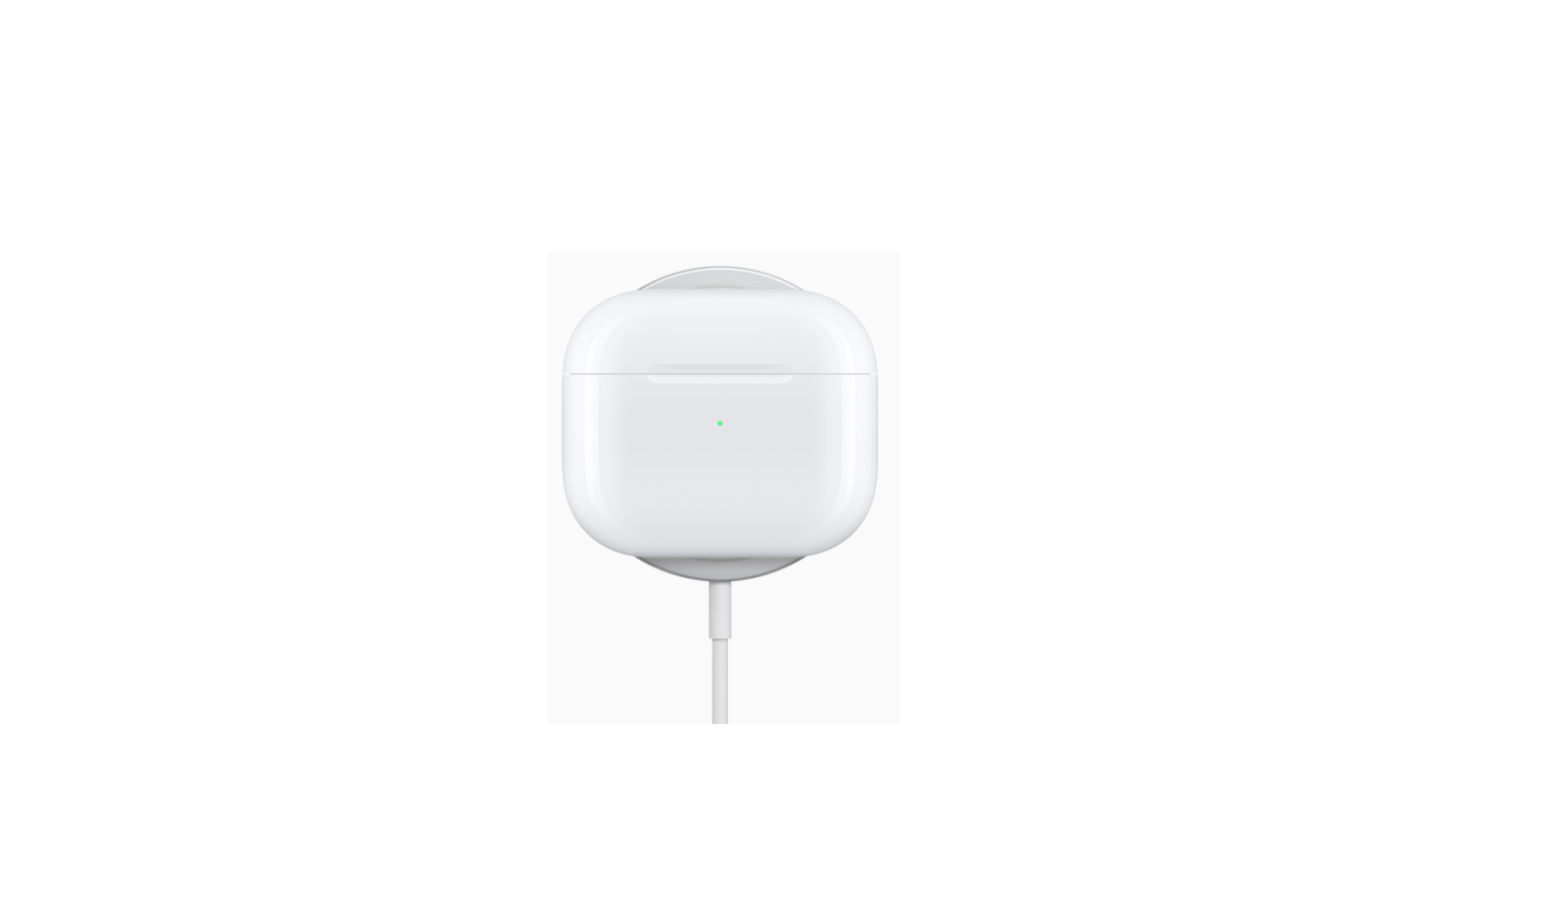 Apple Airpods Pro Magsafe Charging Case safety featured